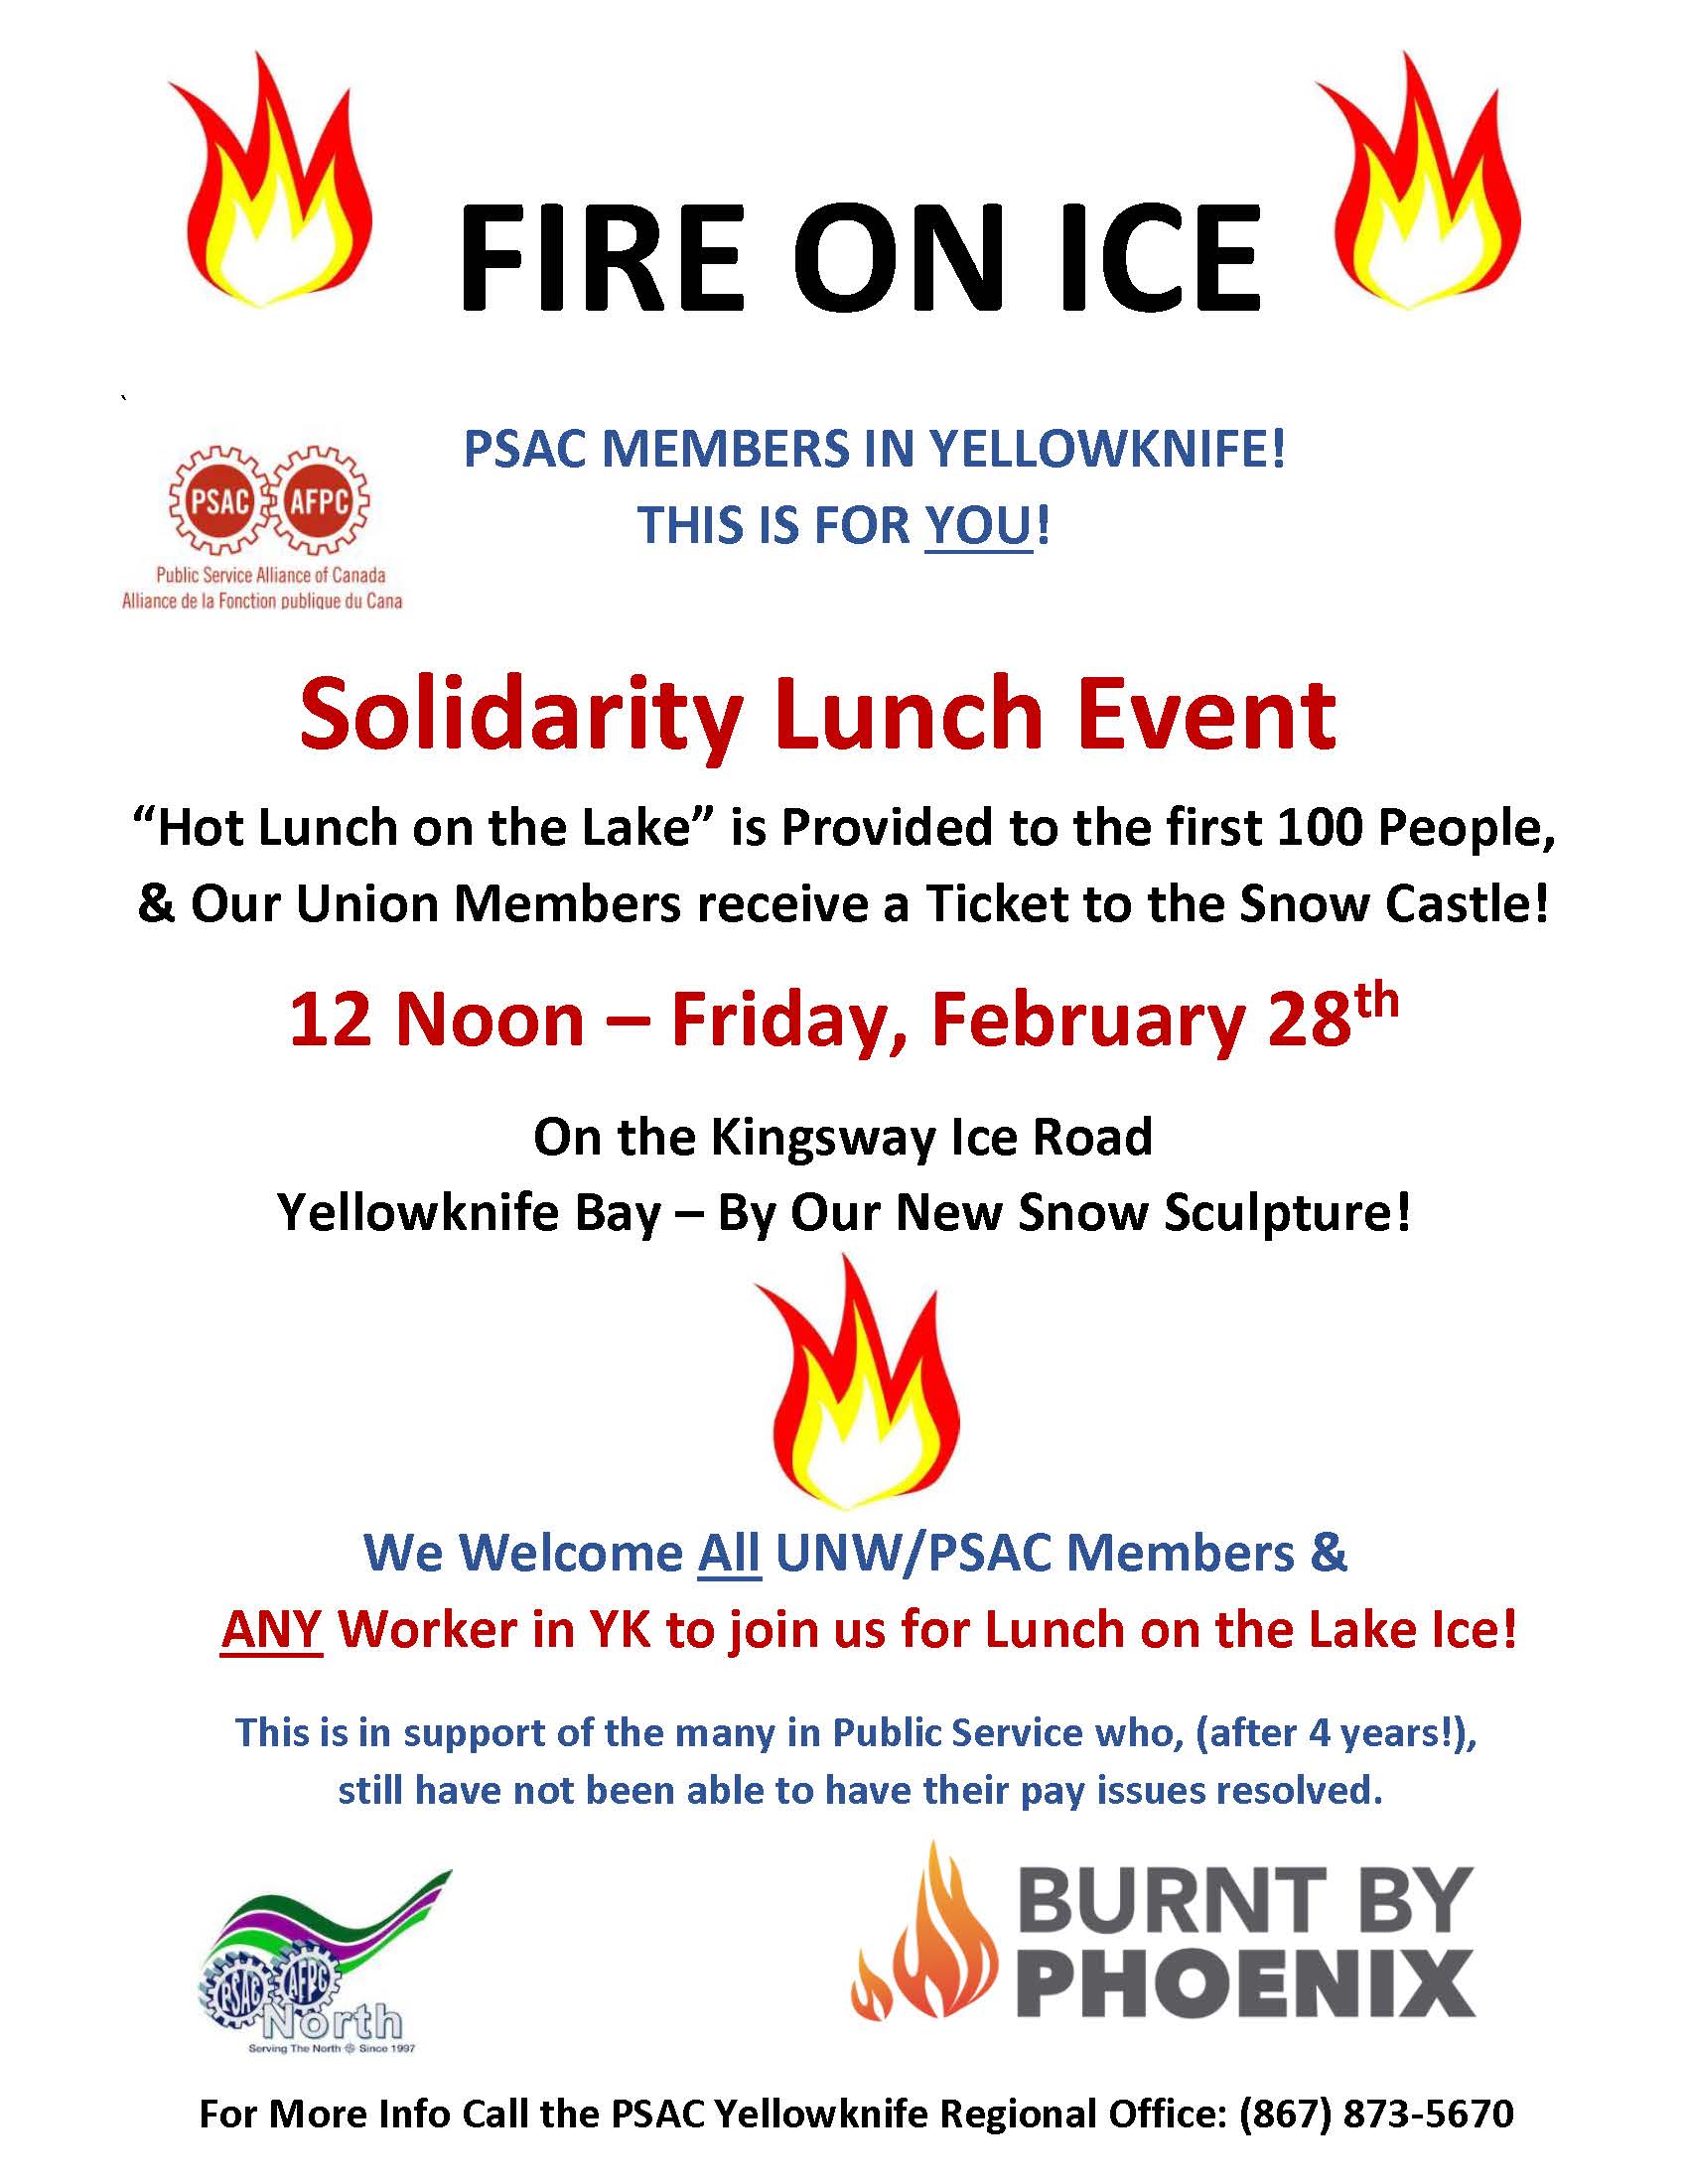 Solidarity Lunch Event “Hot Lunch on the Lake” is Provided to the first 100 People, & Our Union Members receive a Ticket to the Snow Castle! 12 Noon – Friday, February 28th On the Kingsway Ice Road Yellowknife Bay – By Our New Snow Sculpture! We Welcome All UNW/PSAC Members & ANY Worker in YK to join us for Lunch on the Lake Ice! This is in support of the many in Public Service who, (after 4 years!), still have not been able to have their pay issues resolved.